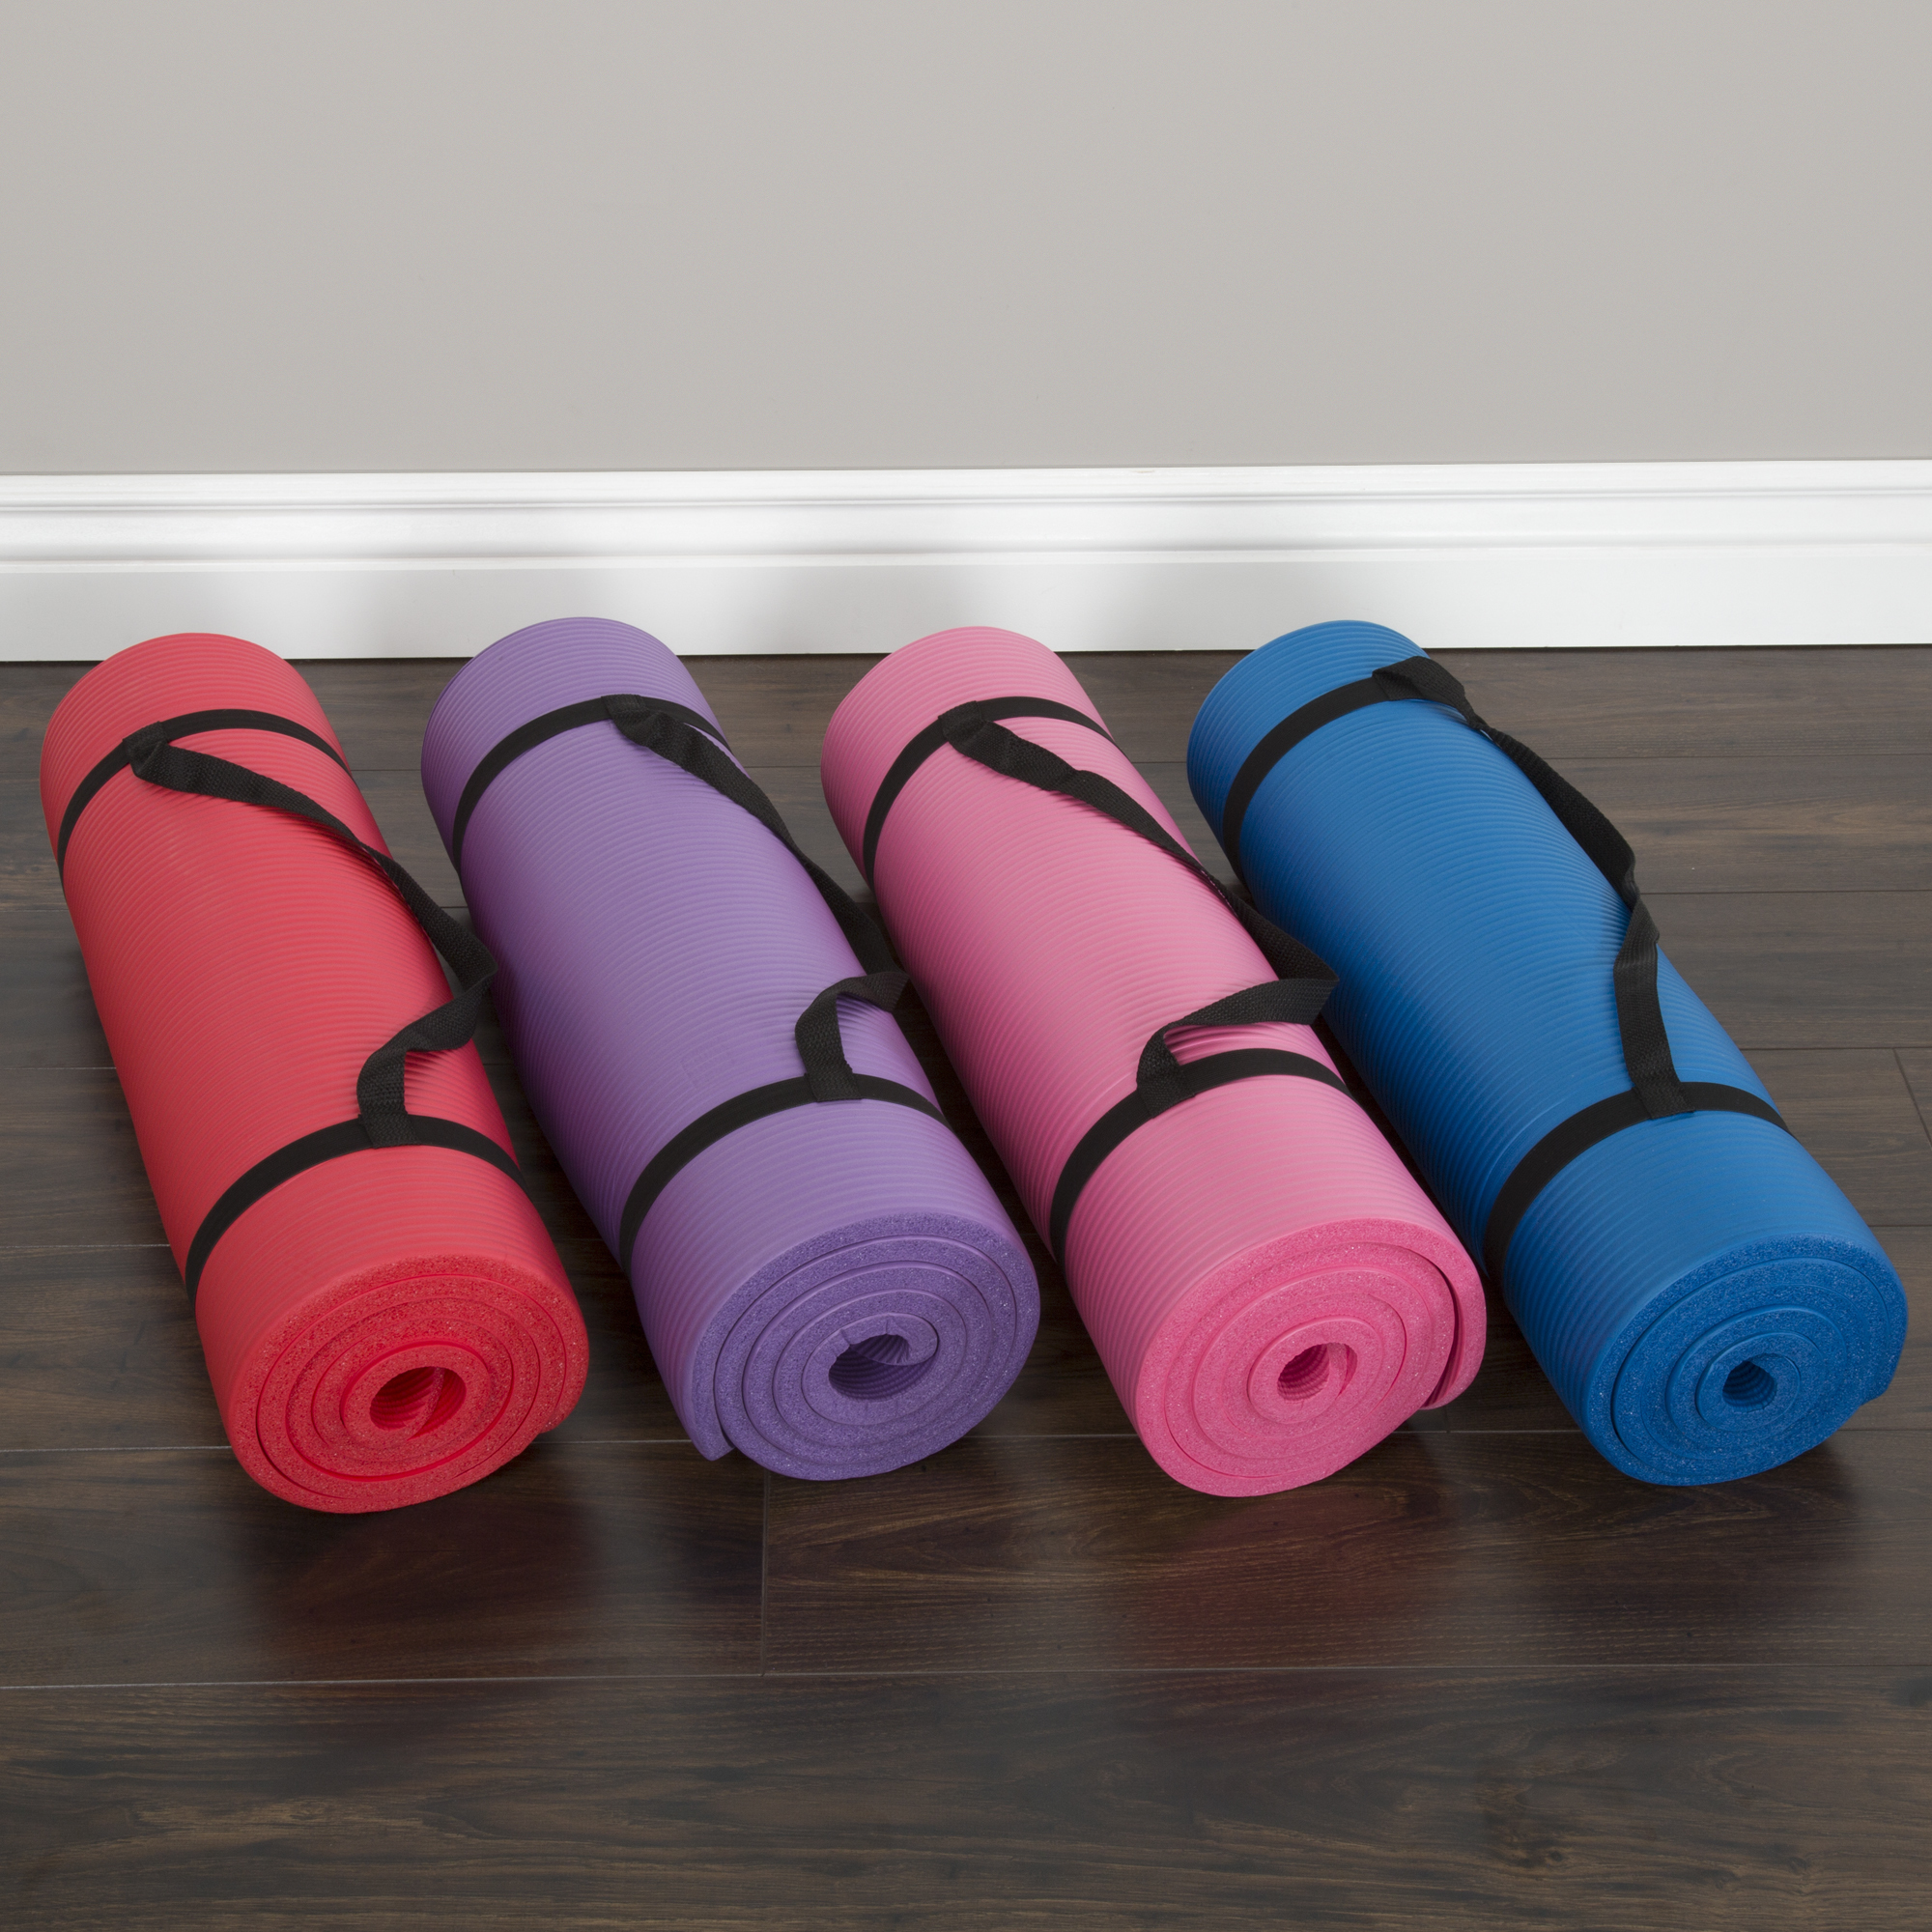 Exercise Mats Exercise Equipment - Bed Bath & Beyond